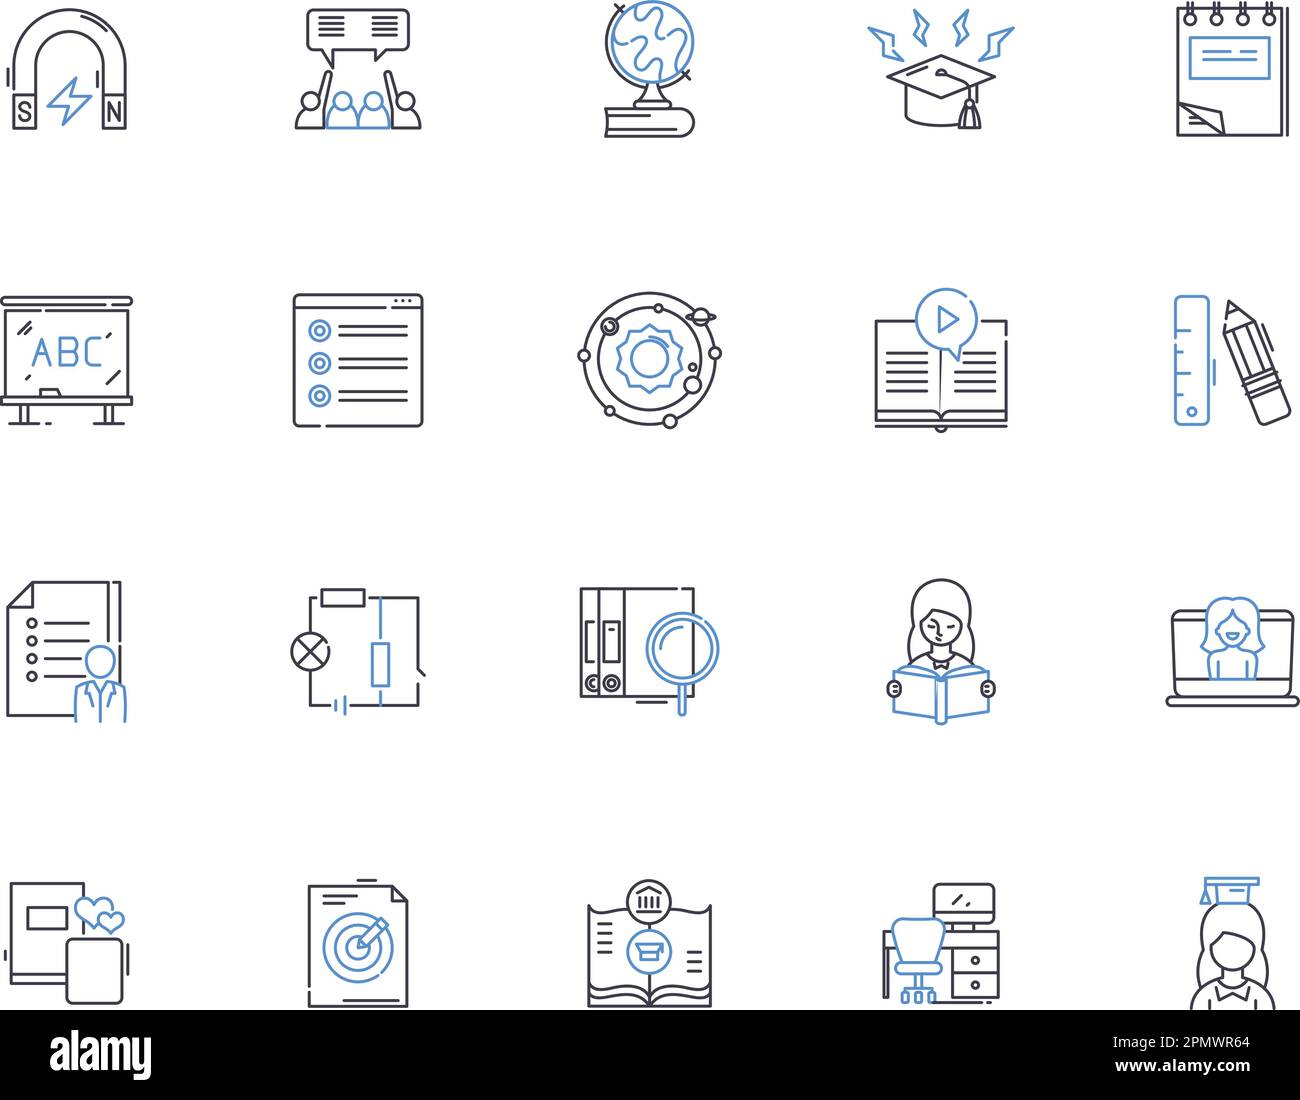 Homework outline icons collection. Exercise, Assignment, Task, Study, Quiz, Projects, Research vector and illustration concept set. Writing, Papers Stock Vector